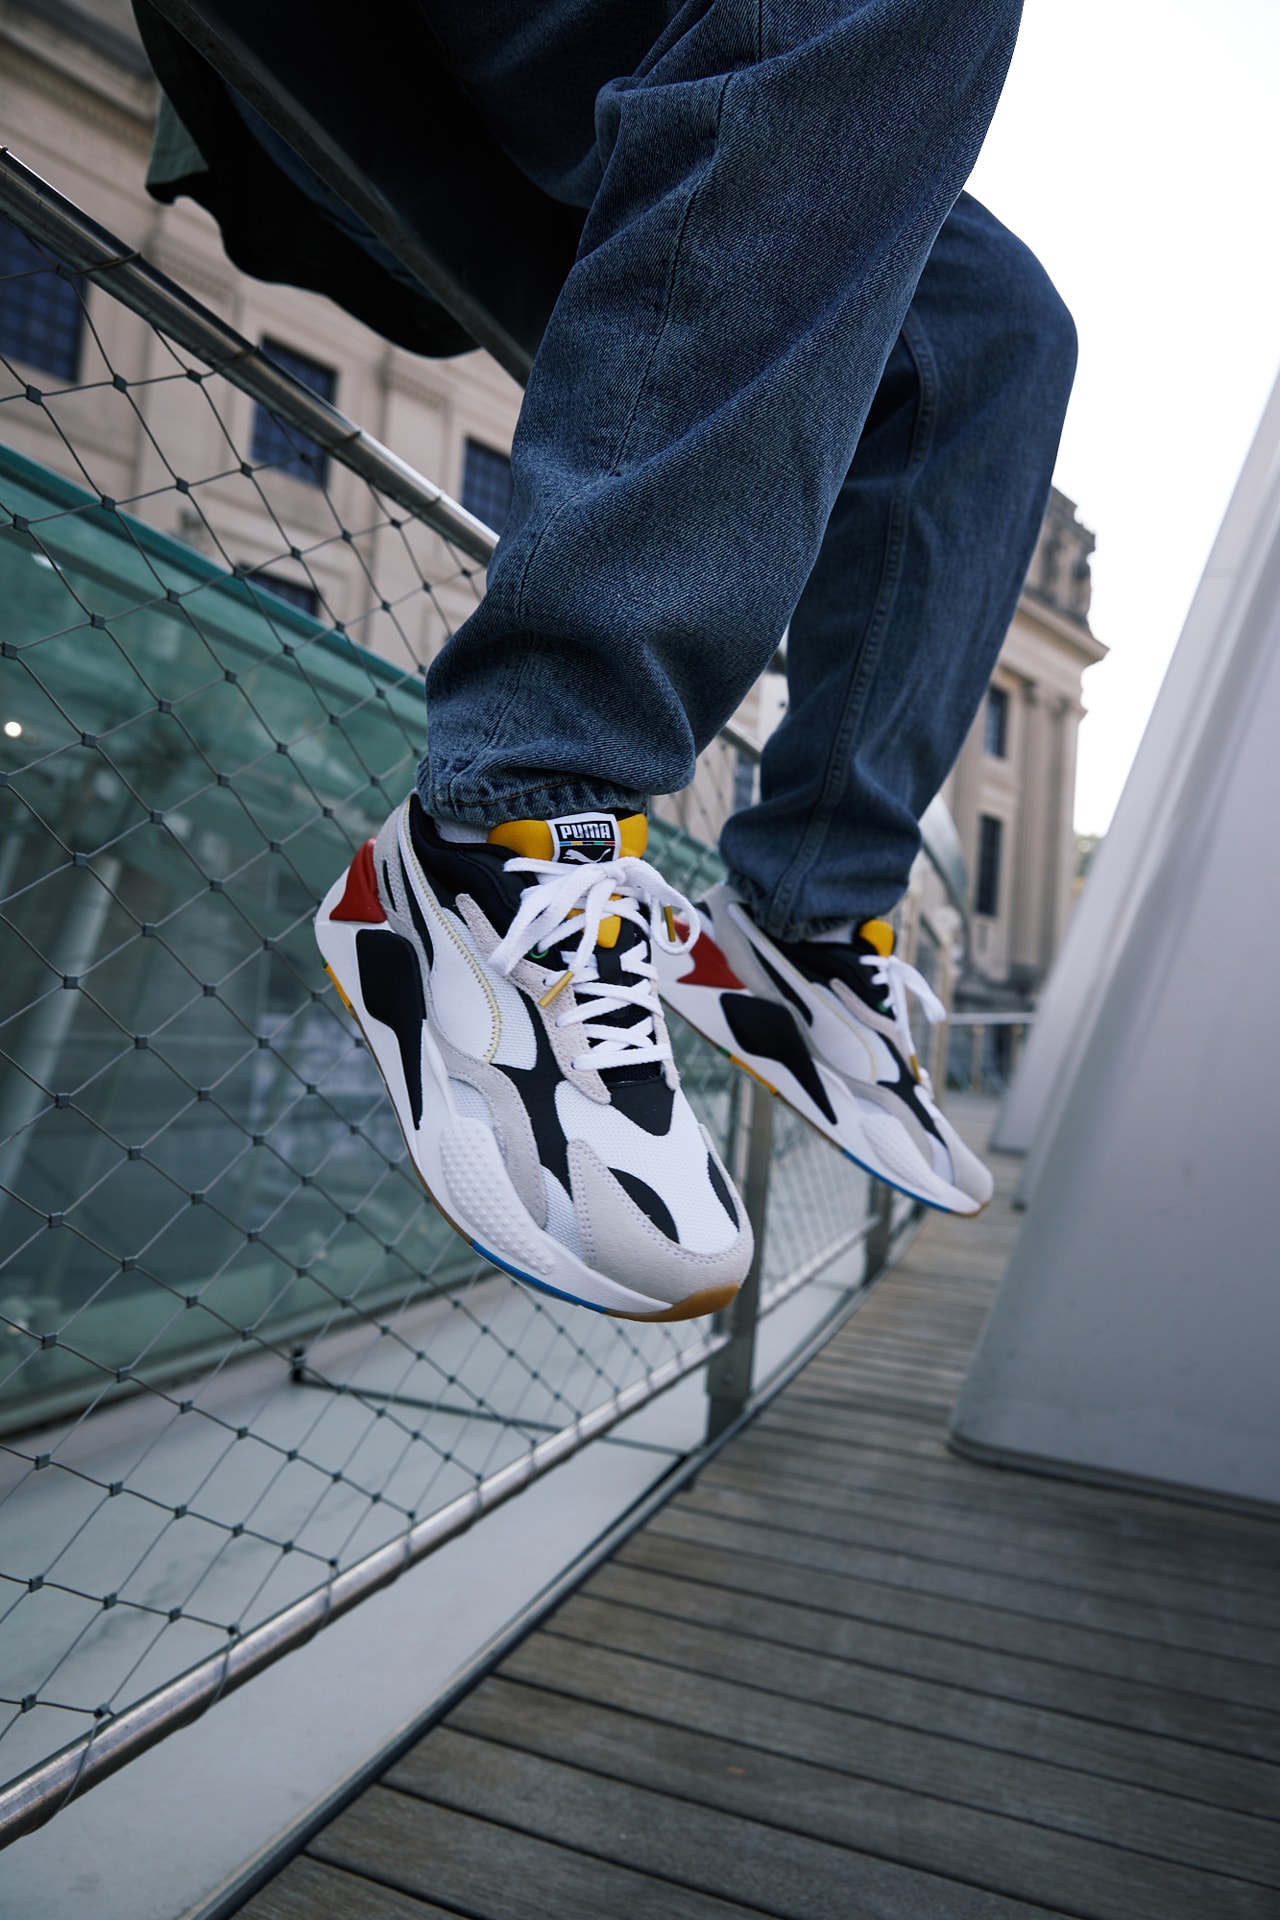 PUMA RS-X³ WH model Salvatore Ferragamo slip-on sneakers horsebit logo red tag on the upper, blue heel tab and yellow tongue unify collection retro future ridged rubber sole and round toe black and gold toned luxury casual options platform sneaker mens womens